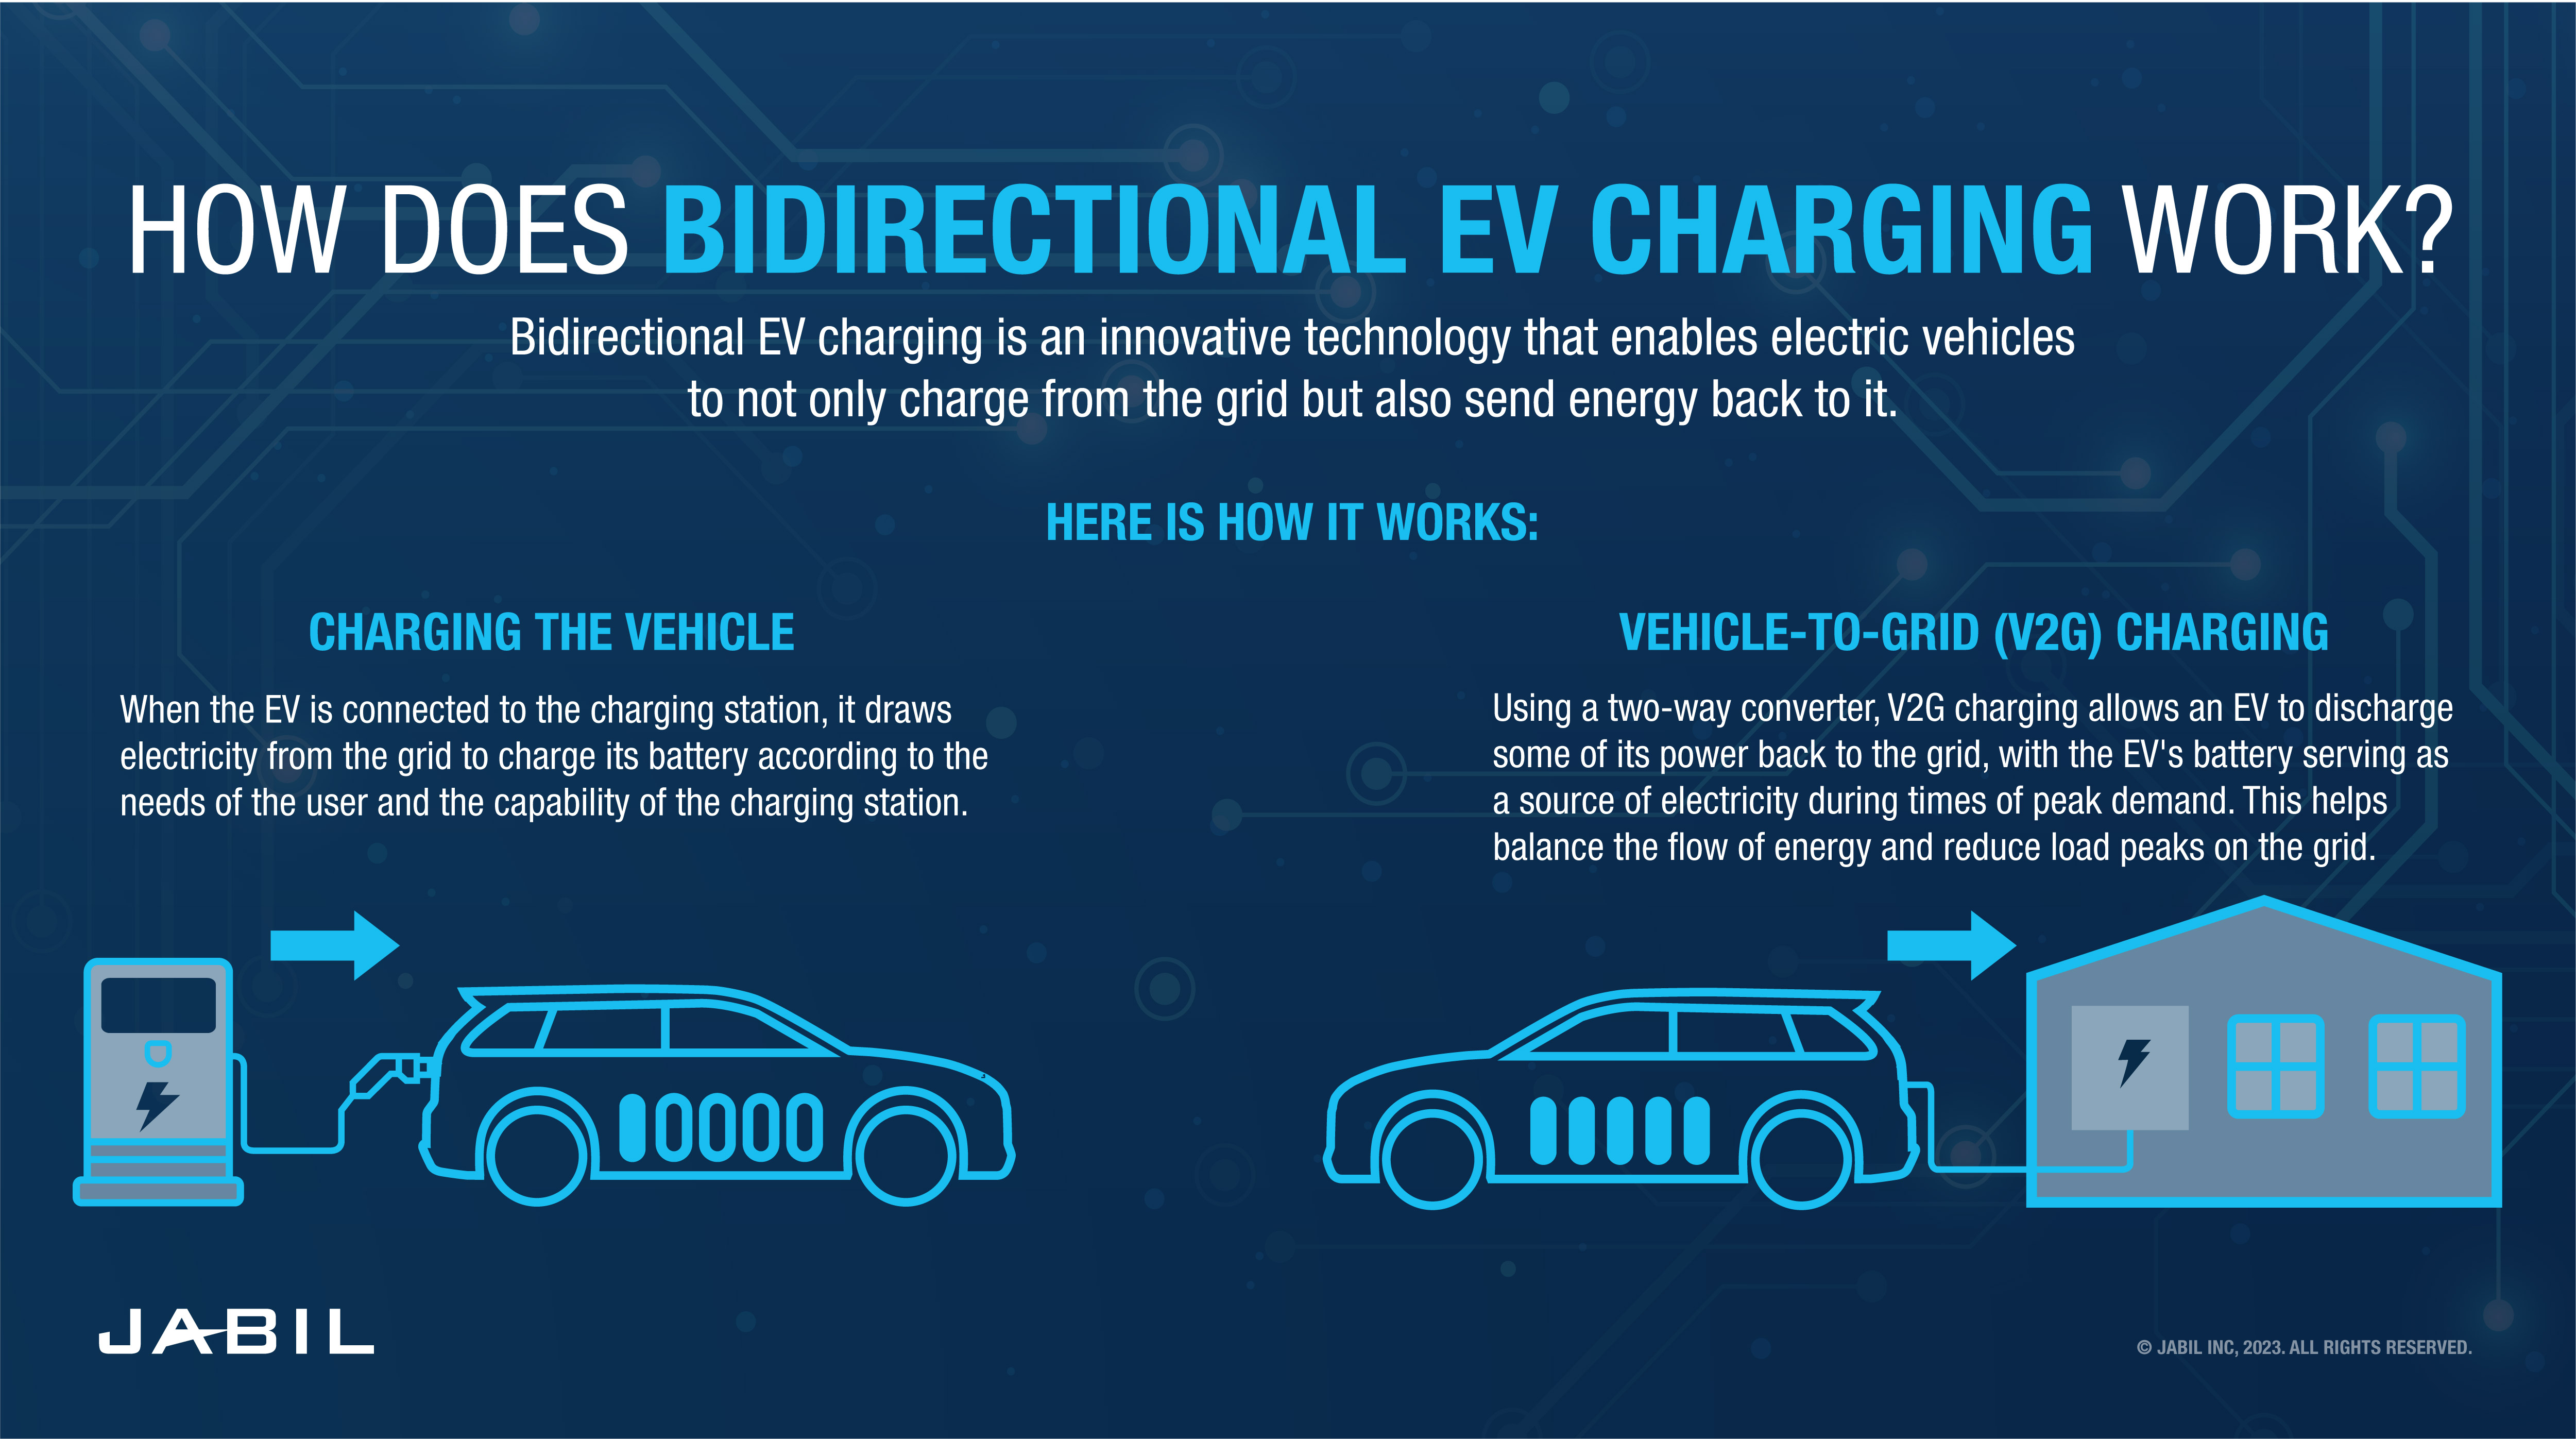 Germany to massively expand electric car charging network